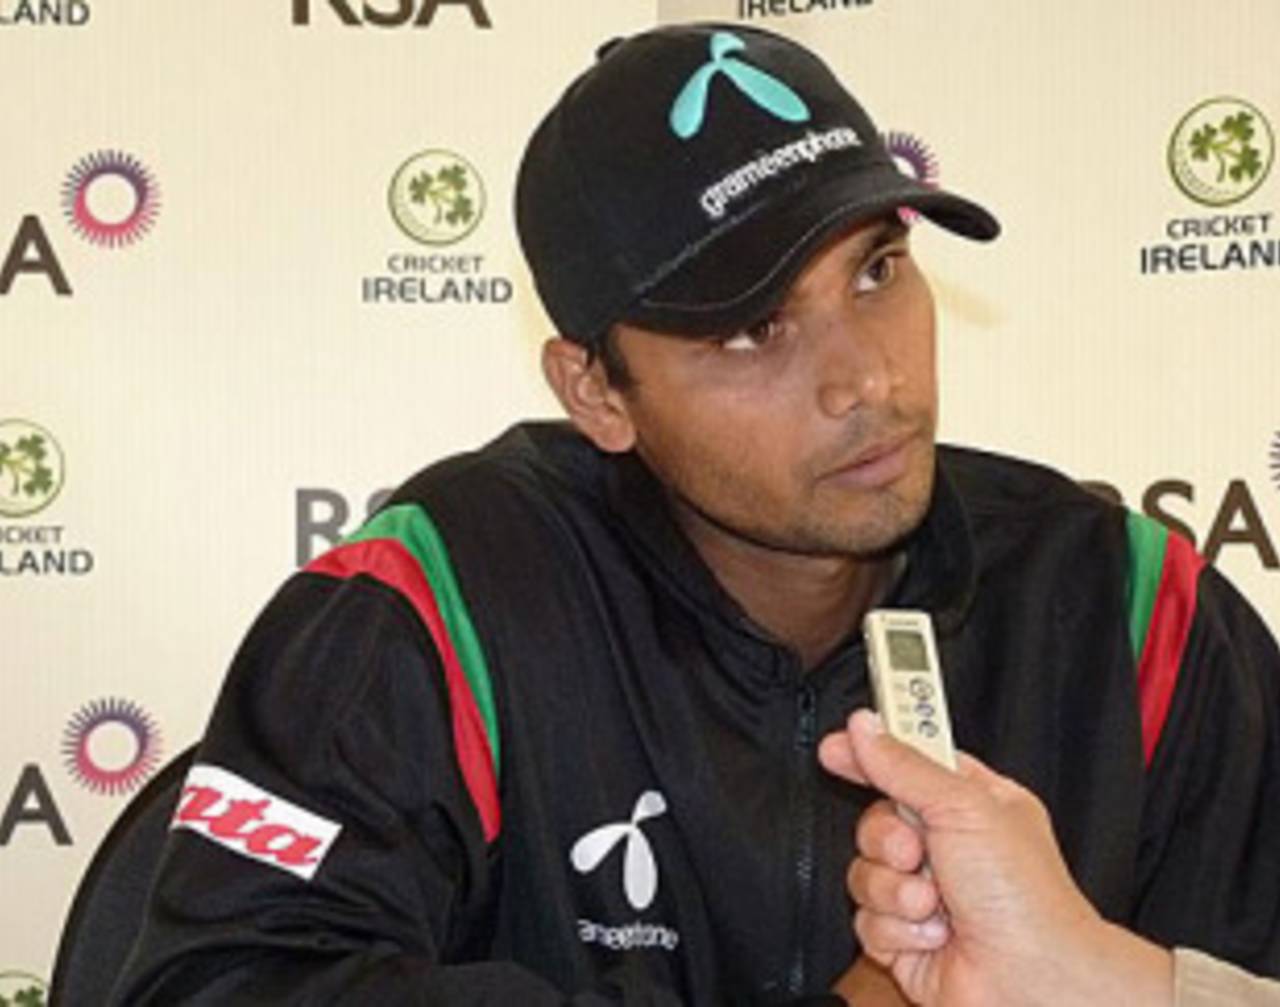 Mashrafe Mortaza's return to the side after an ankle injury hasn't been successful thus far&nbsp;&nbsp;&bull;&nbsp;&nbsp;Grameenphone